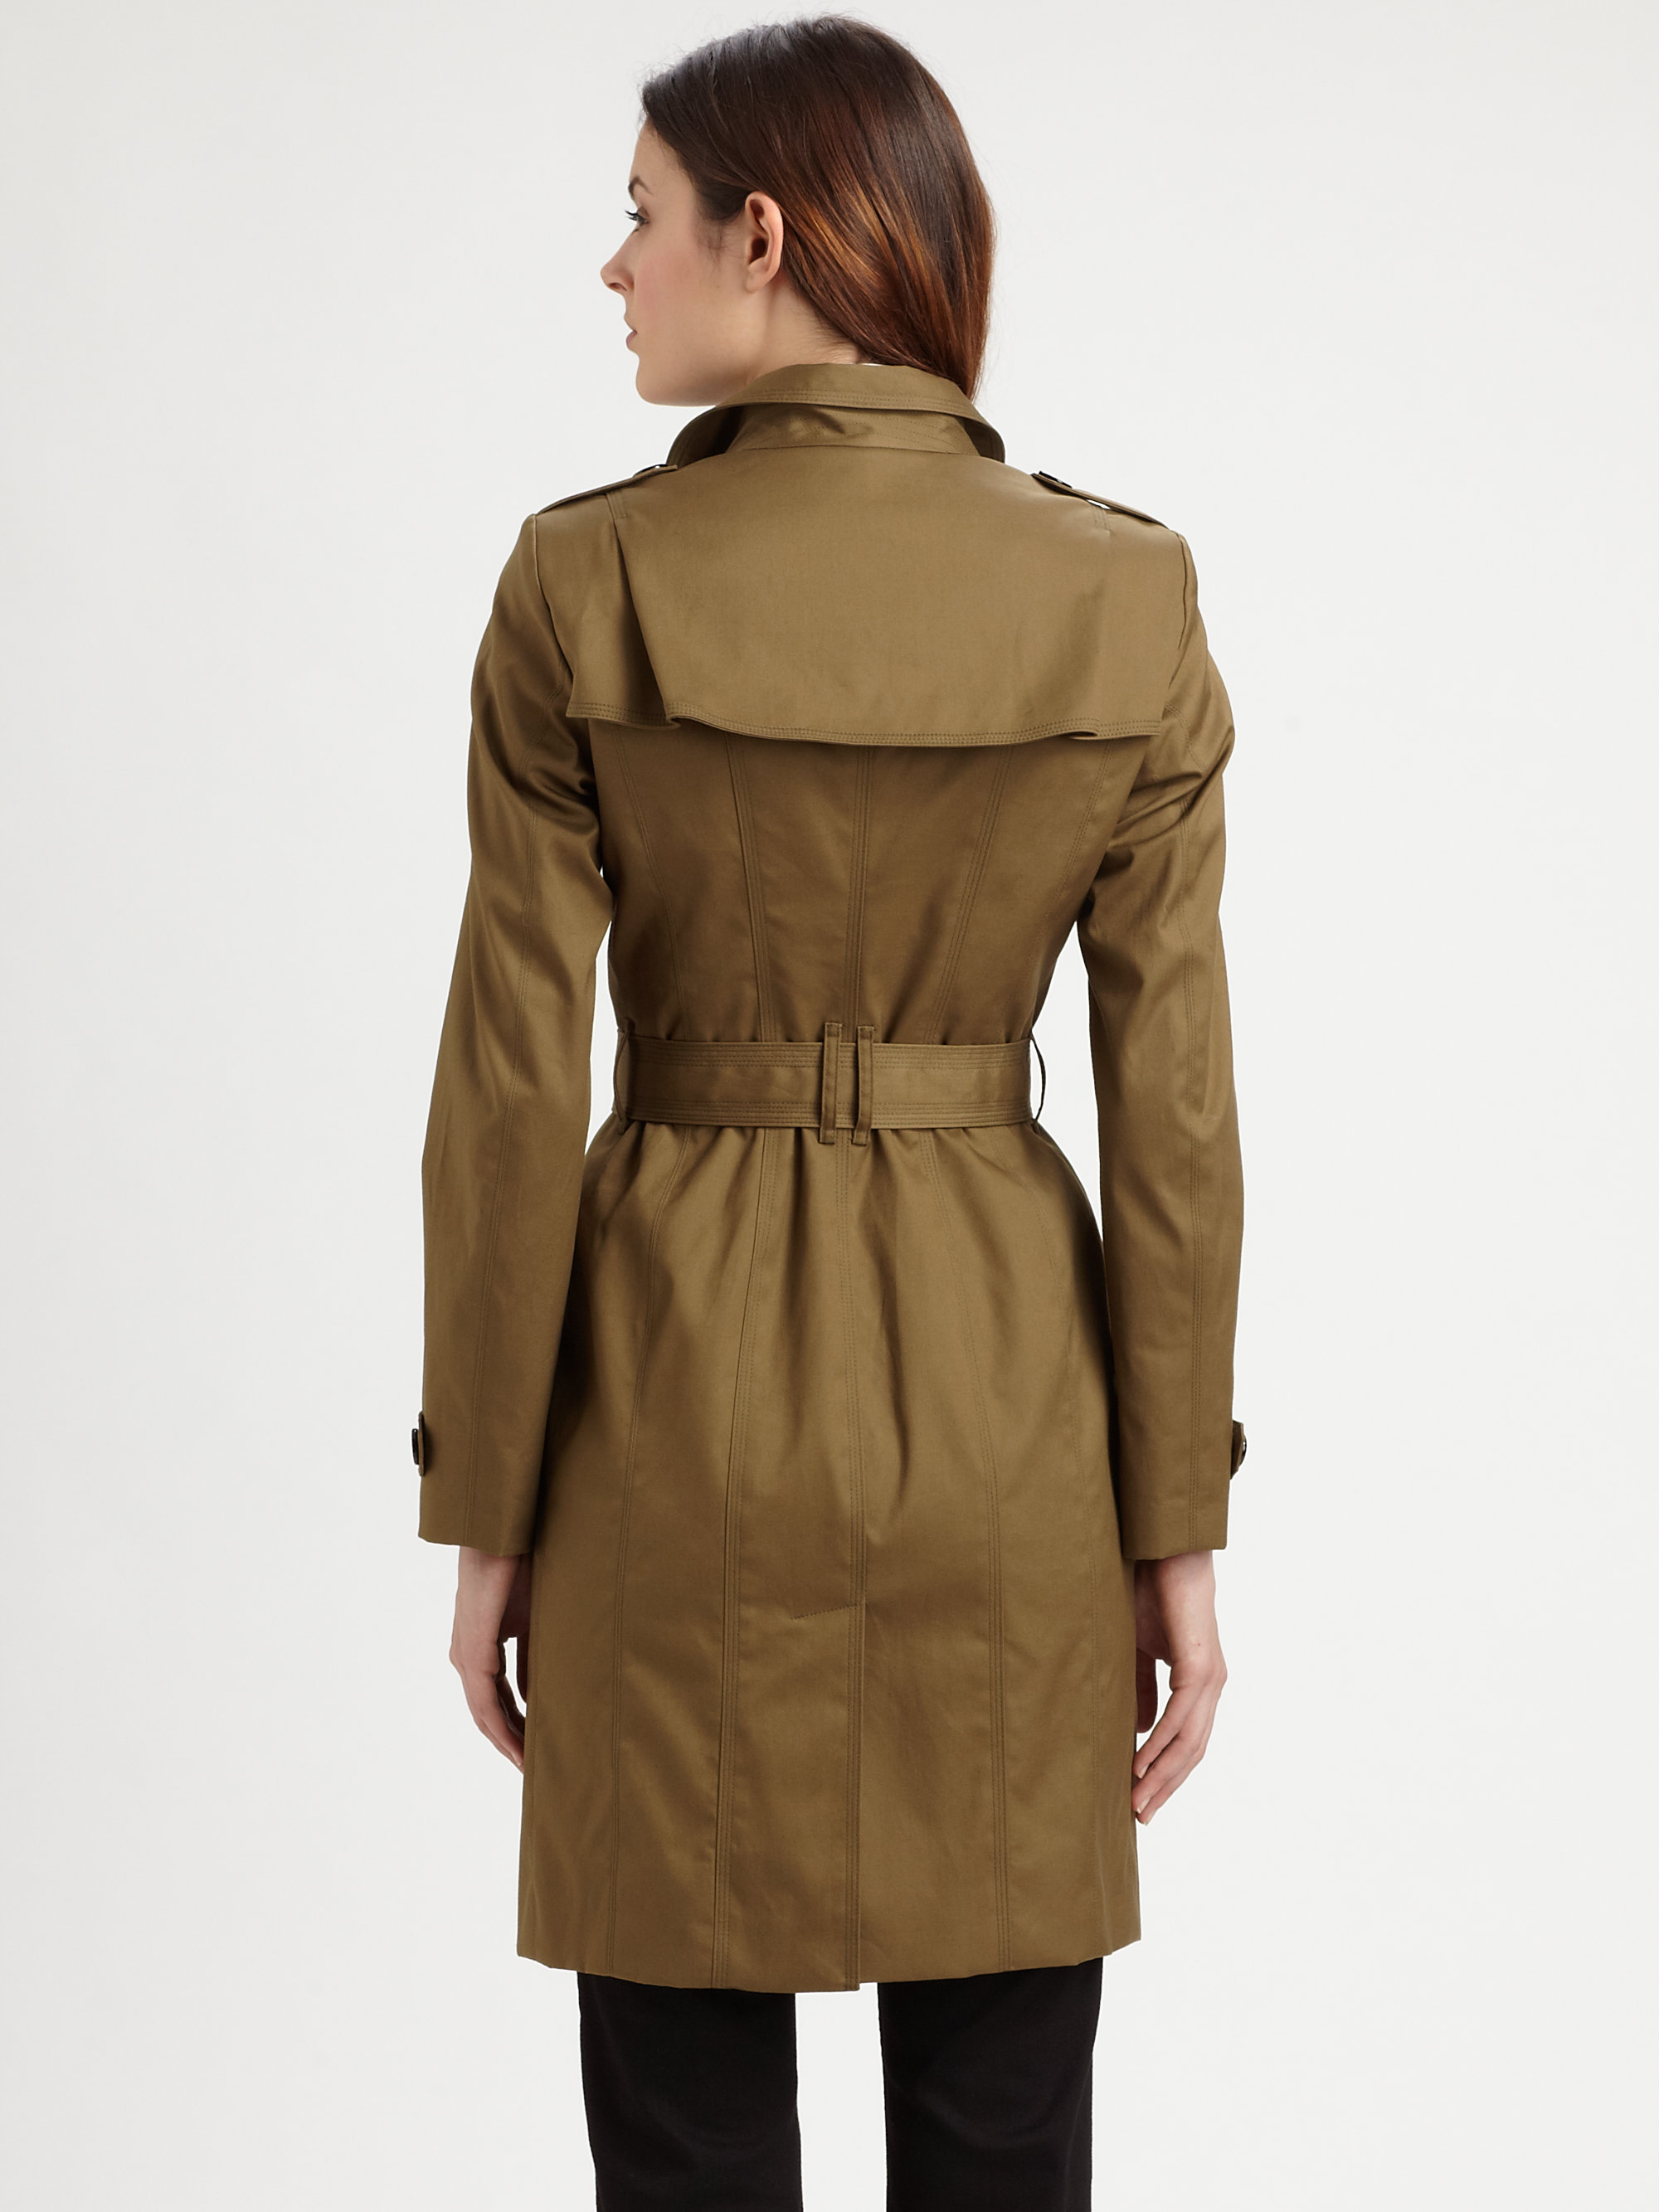 Lyst - Burberry Funnel Collar Trench in Green